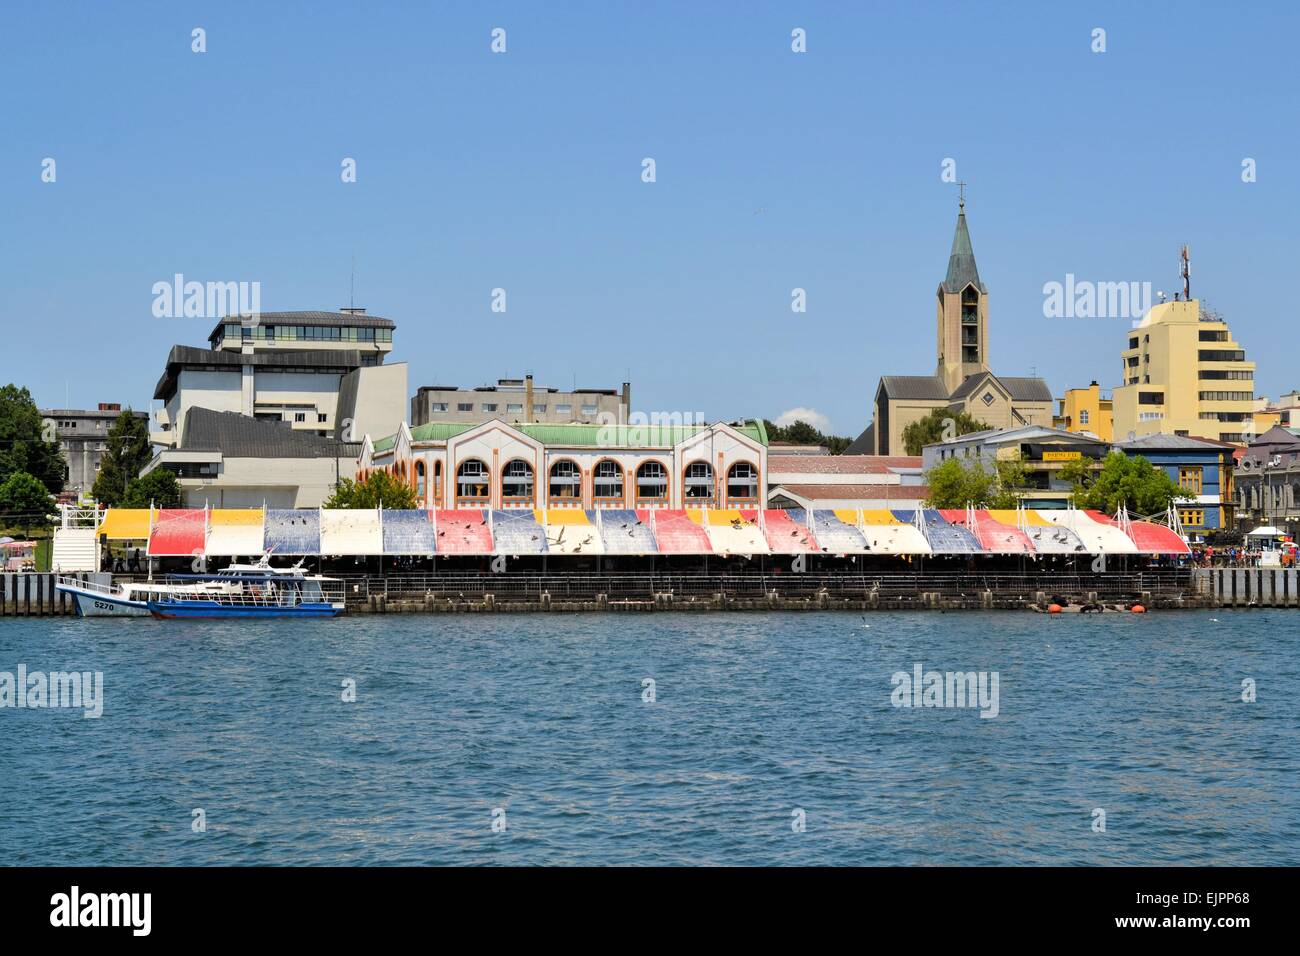 Old center with fish market and river, Valdivia, Chile Stock Photo